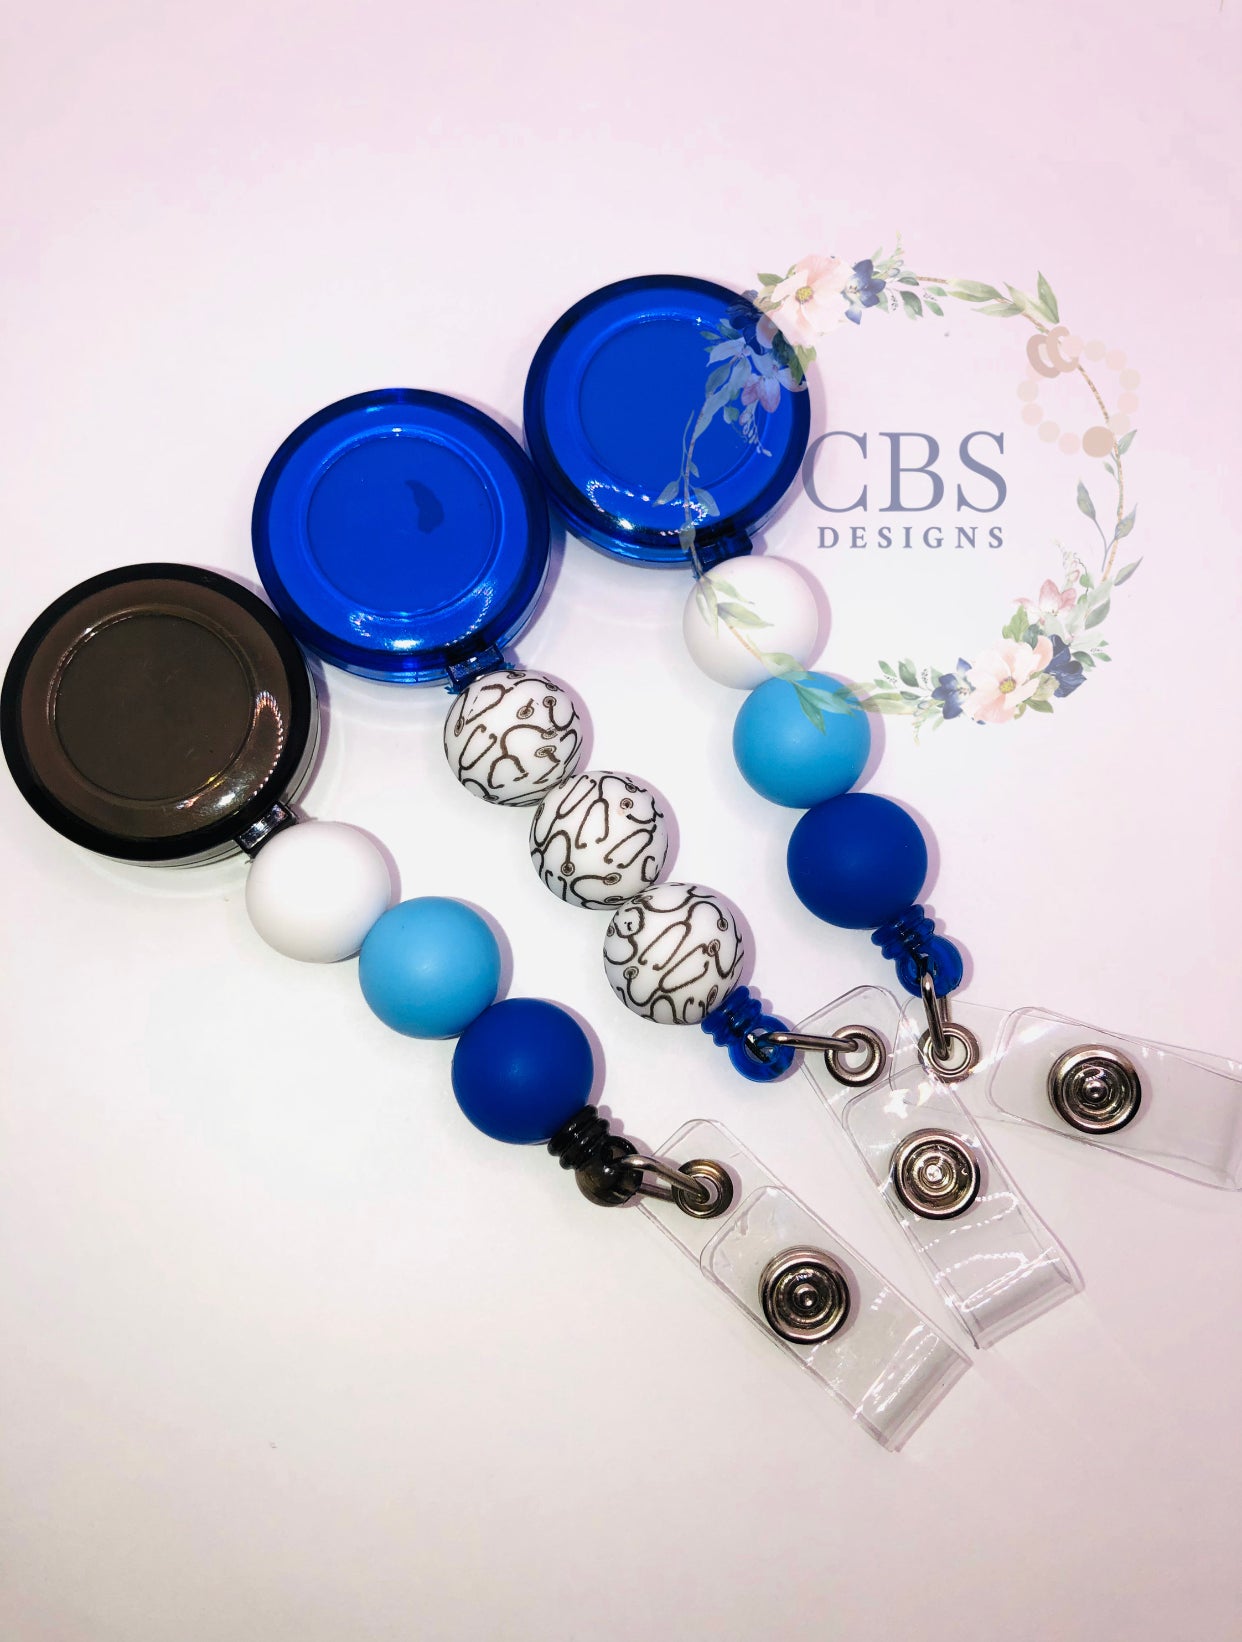 How to add beads to your badge reel 